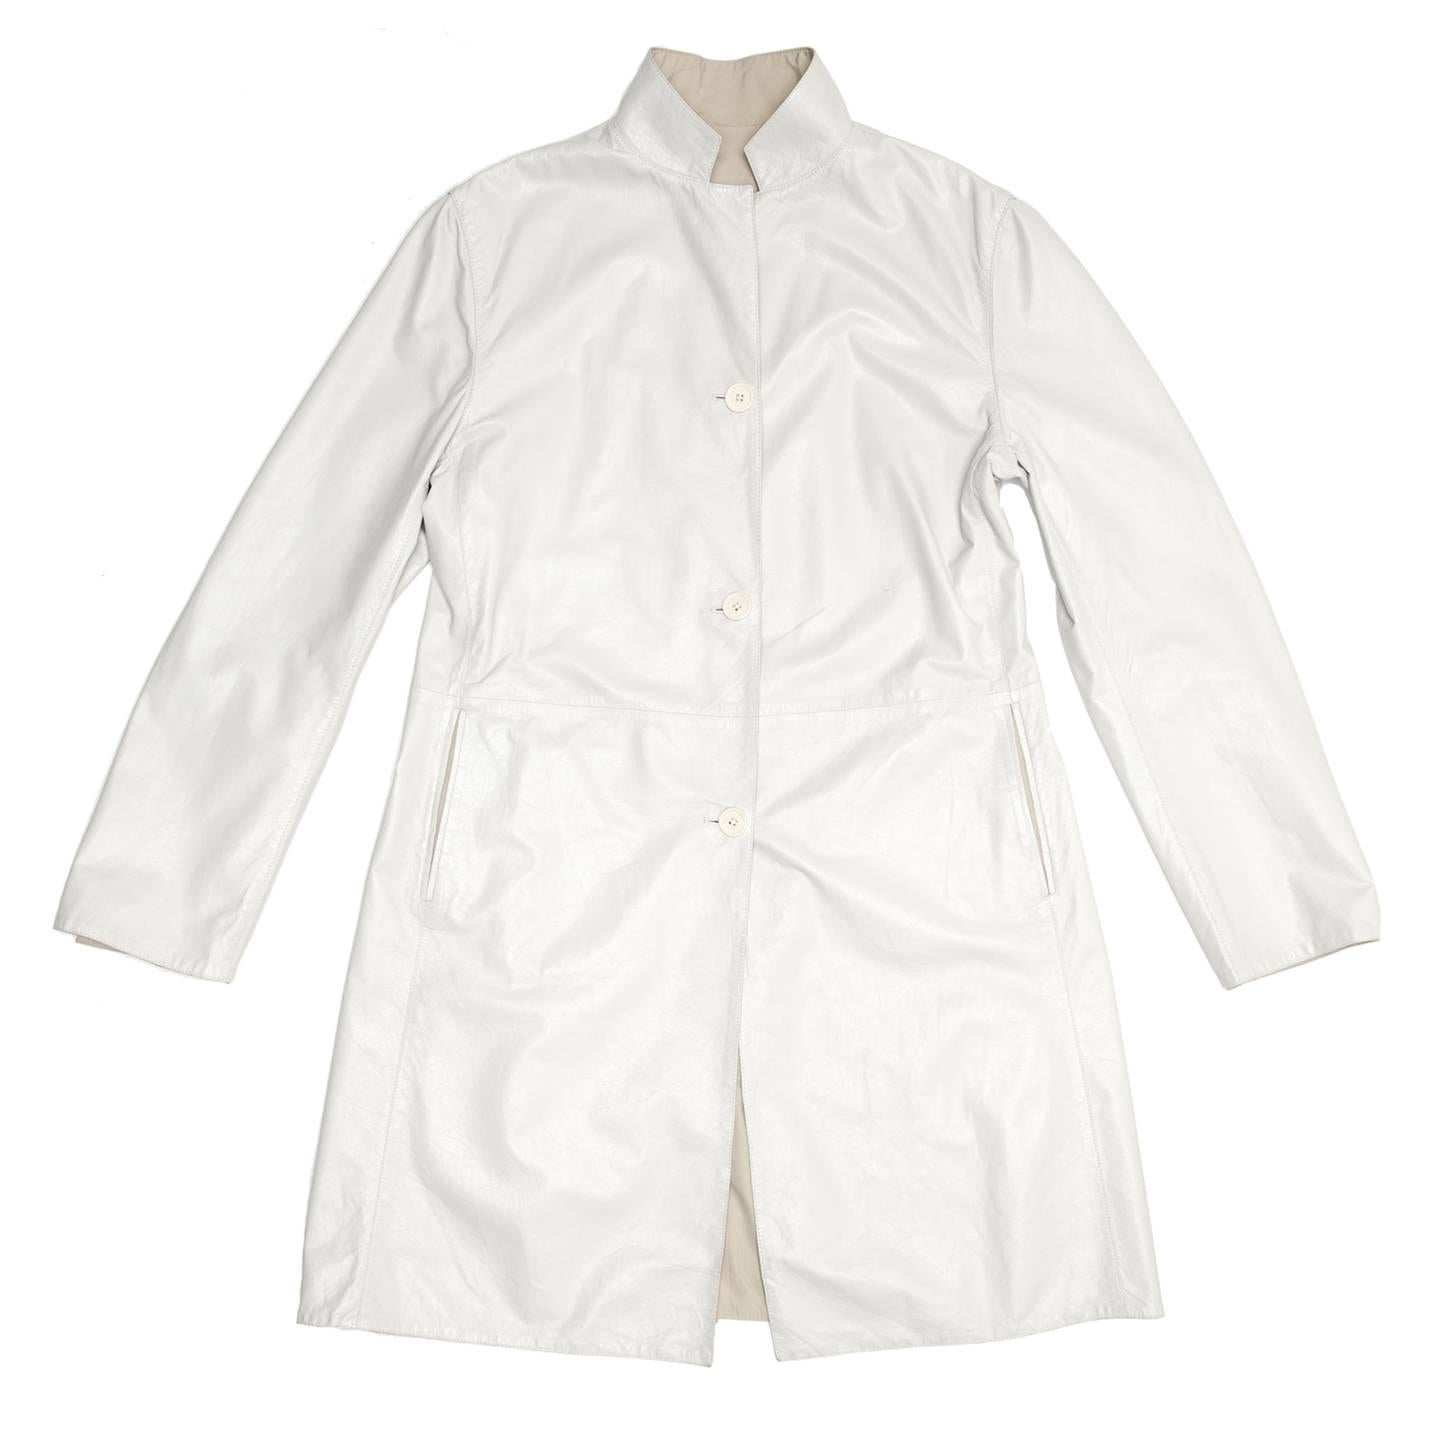 Reversible white leather coat with tan lining. This style is reversible, with tone-on-tone buttons to match the fabric, elegant slash pockets on the leather side and more casual zipped vertical pockets on the tan color side. The small notched collar